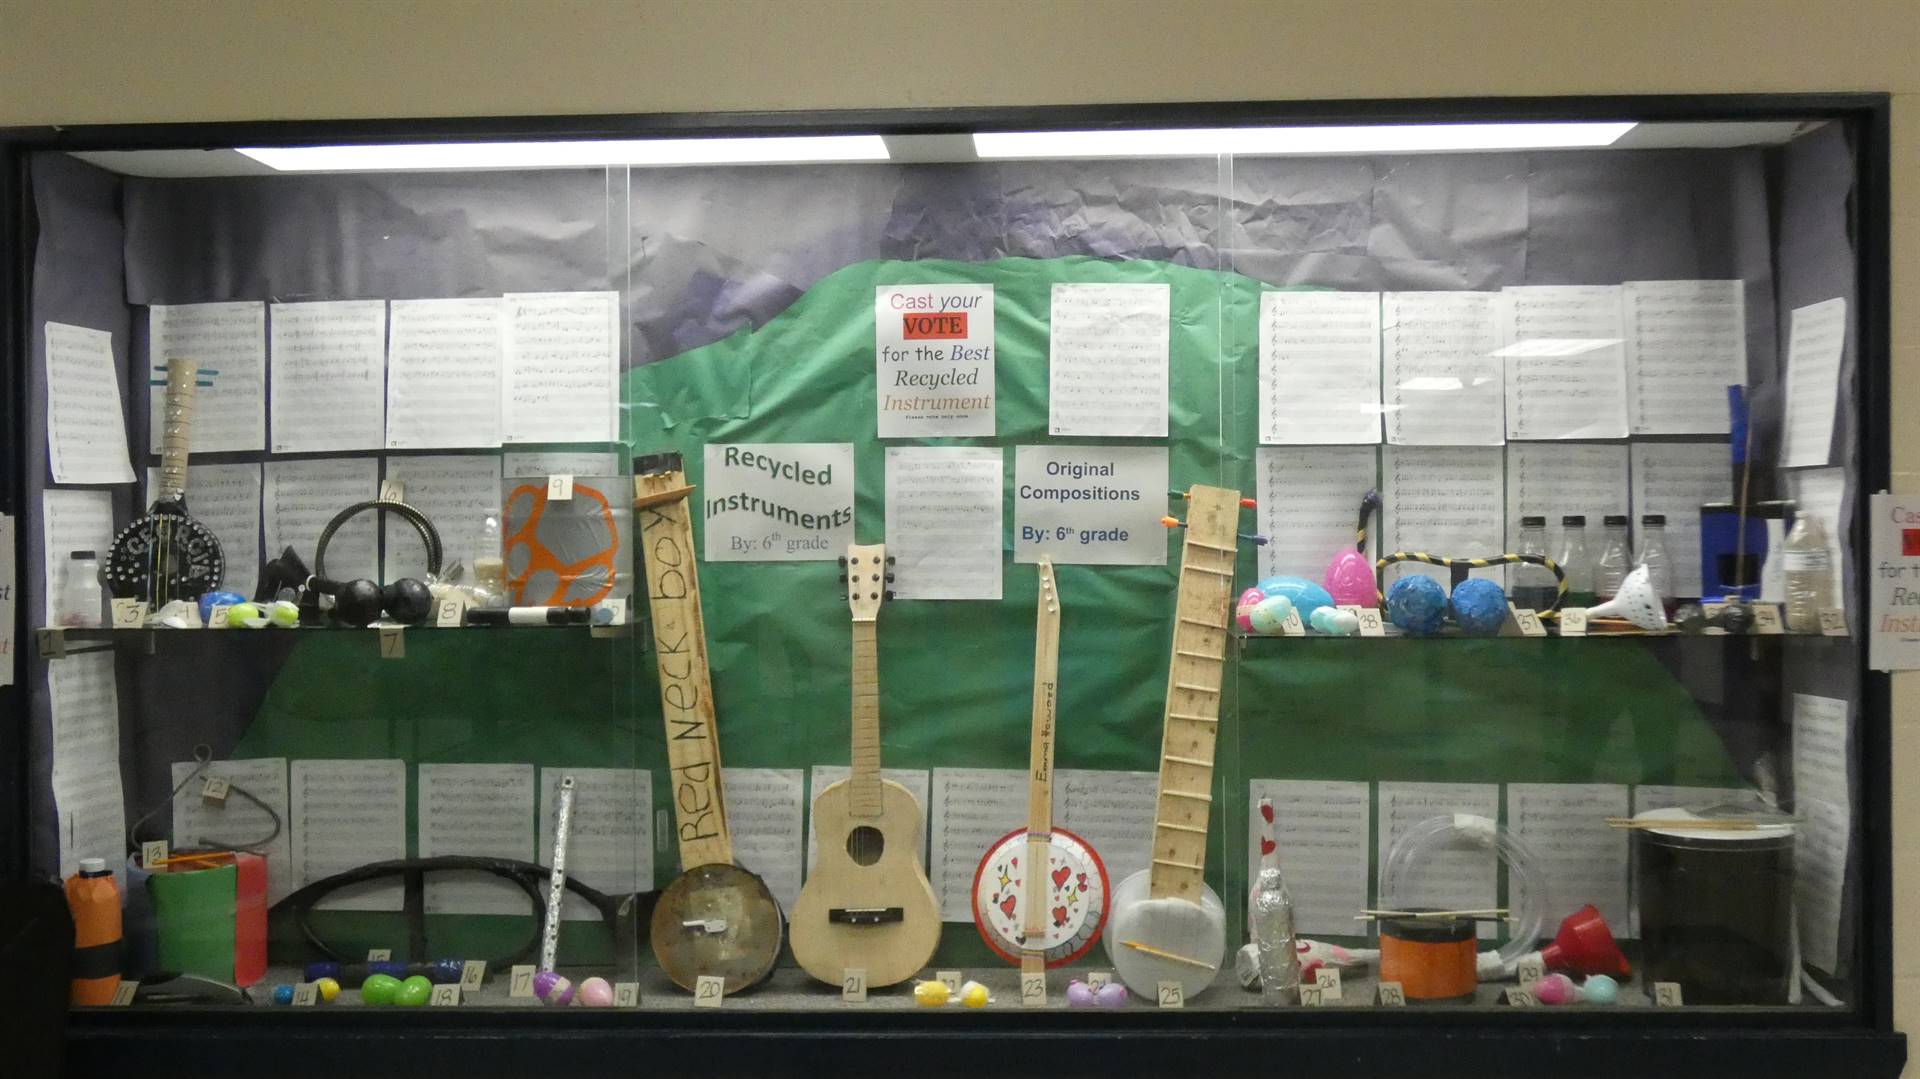 6th grade recycled instruments